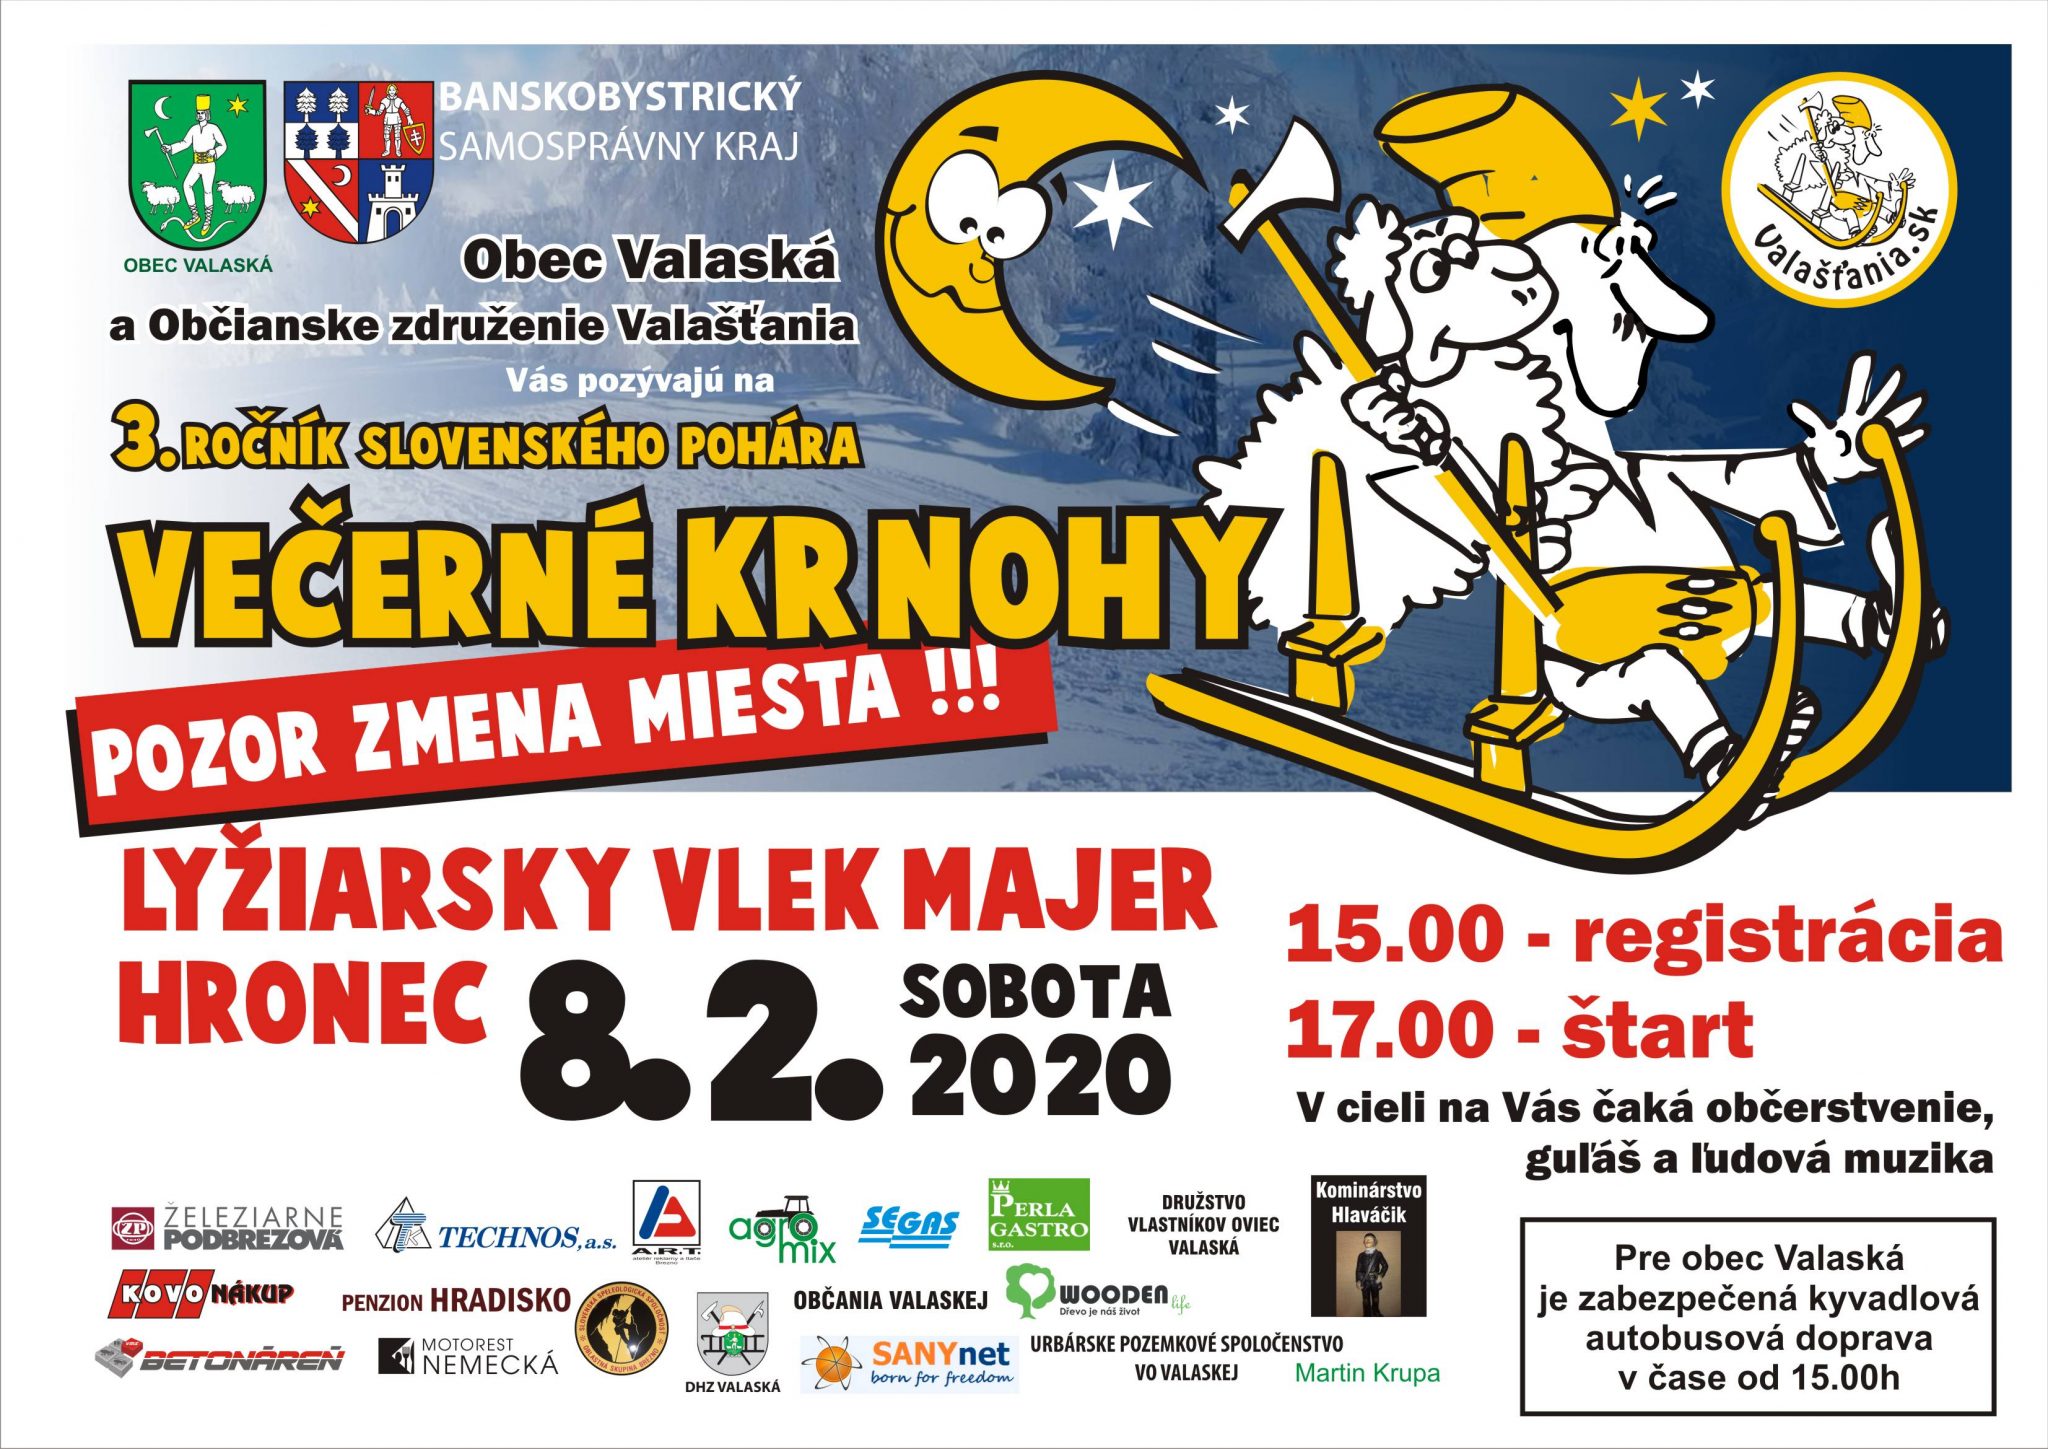 Krnohy Valask 2019 - 3.ronk